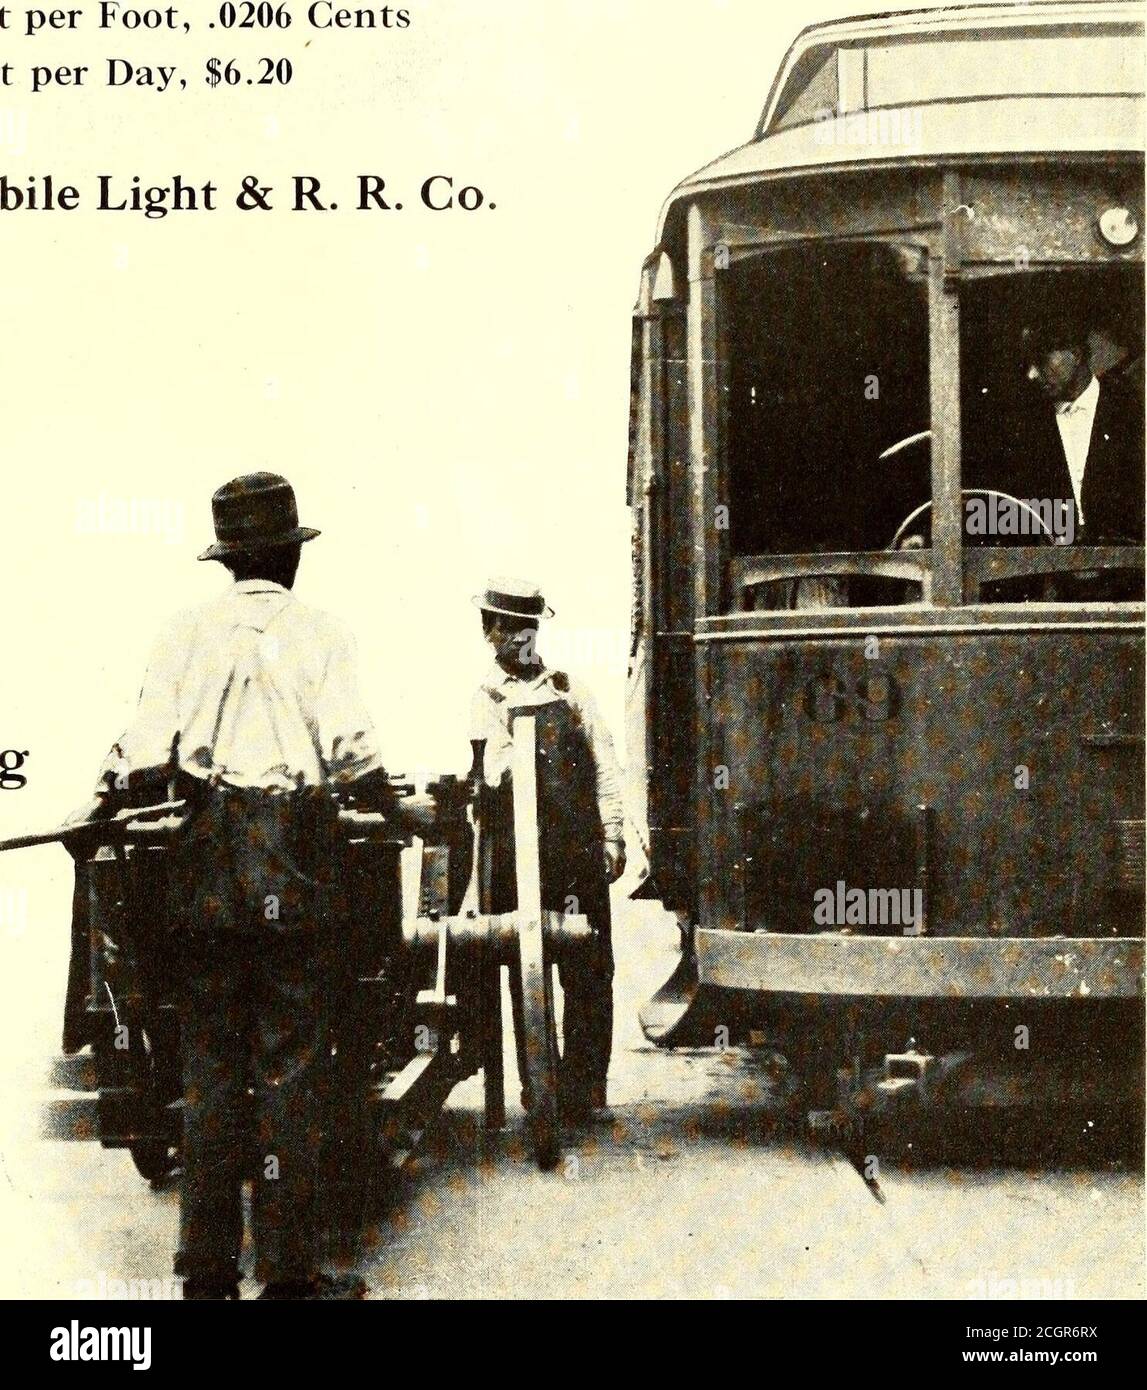 . Electric railway journal . These Three for Maximum Service Wbt Jfalfc Company JHtitoaukee NEW YORK CITY—Wendell & MacDuffie Co.LOS ANGELES—Alphonso A. Wigmore NEW ORLEANS—A. M. Lockett & Co. March 20, 1915] ELECTRIC RAILWAY JOURNAL 35 These Men are Grinding anAverage of 300-ft. per day Cost per Foot, .0206 CentsCost per Day, $6.20 Ask the Mobile Light & R. R. Co Reason: TheReciprocatingTrackGrinder Having TheseEssentials. 1. A flat grinding surface. 2. Reciprocating Motion. 3. Forty square inches grinding surface. 4. Four Hundred Strokes per Minute. 5. High Wheel derail. 6. No fine adjustmen Stock Photo